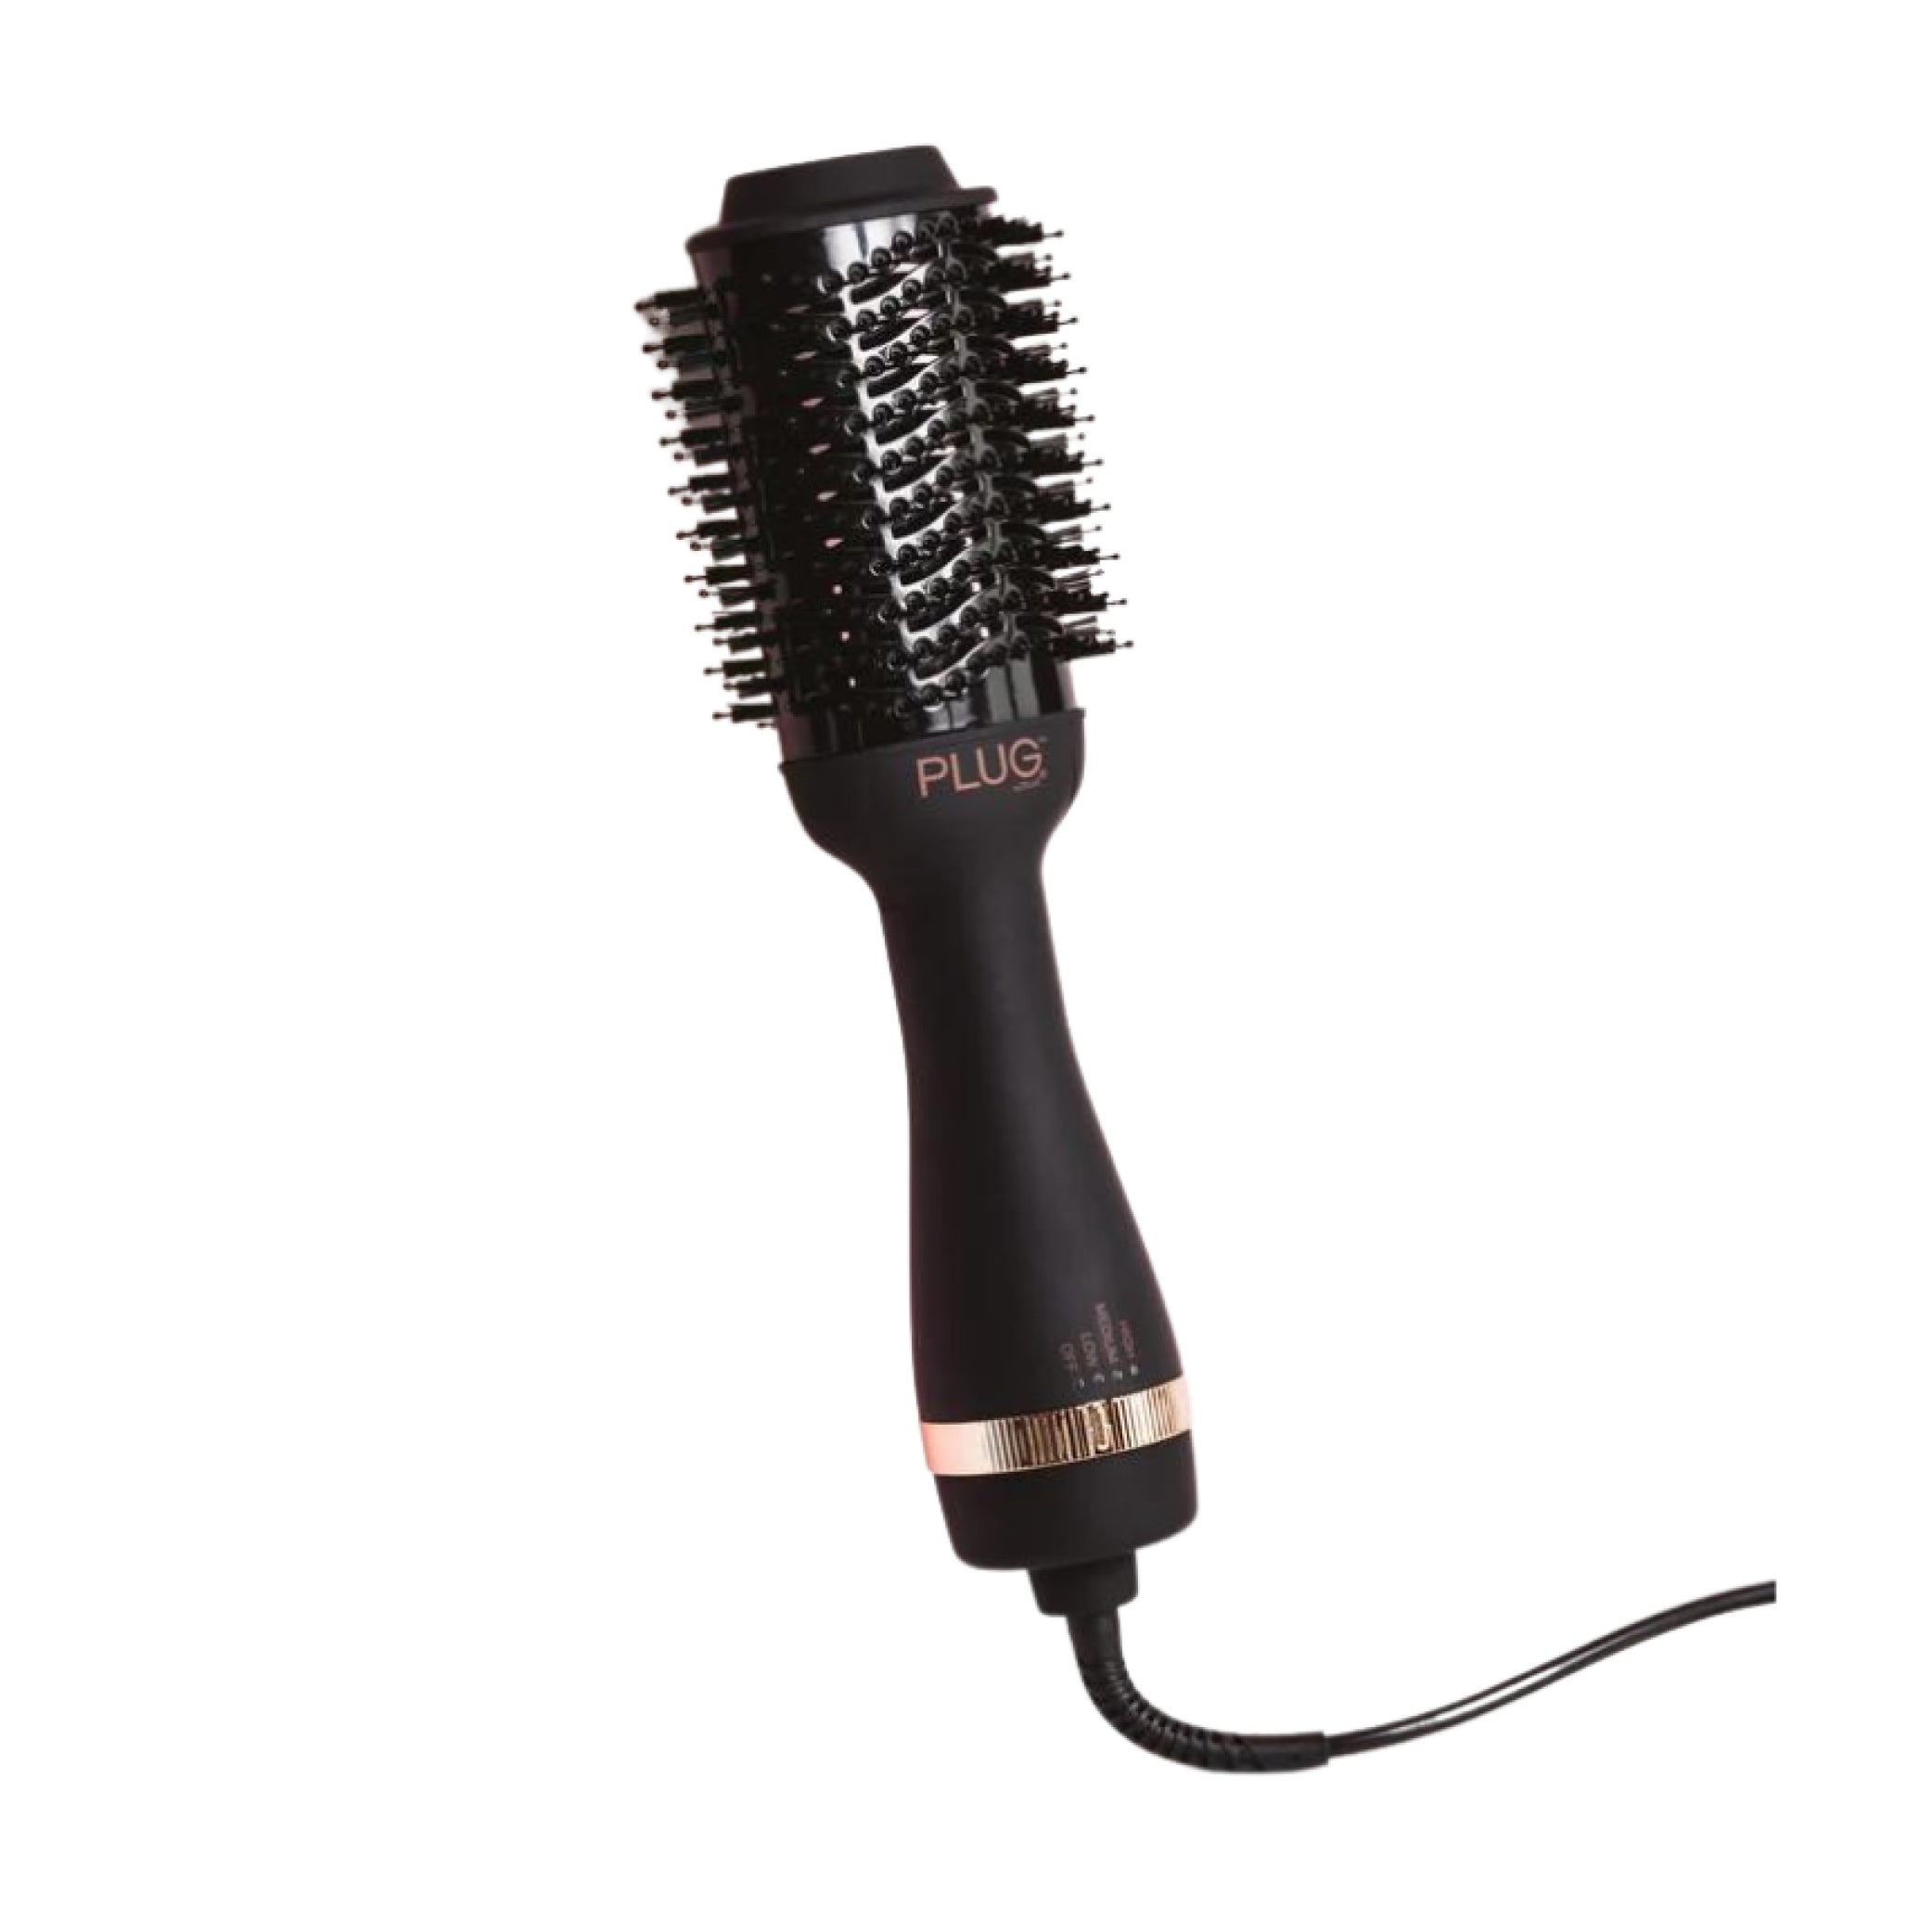 PLUG by Must52 Lift 3 in 1 Blow Dryer Brush